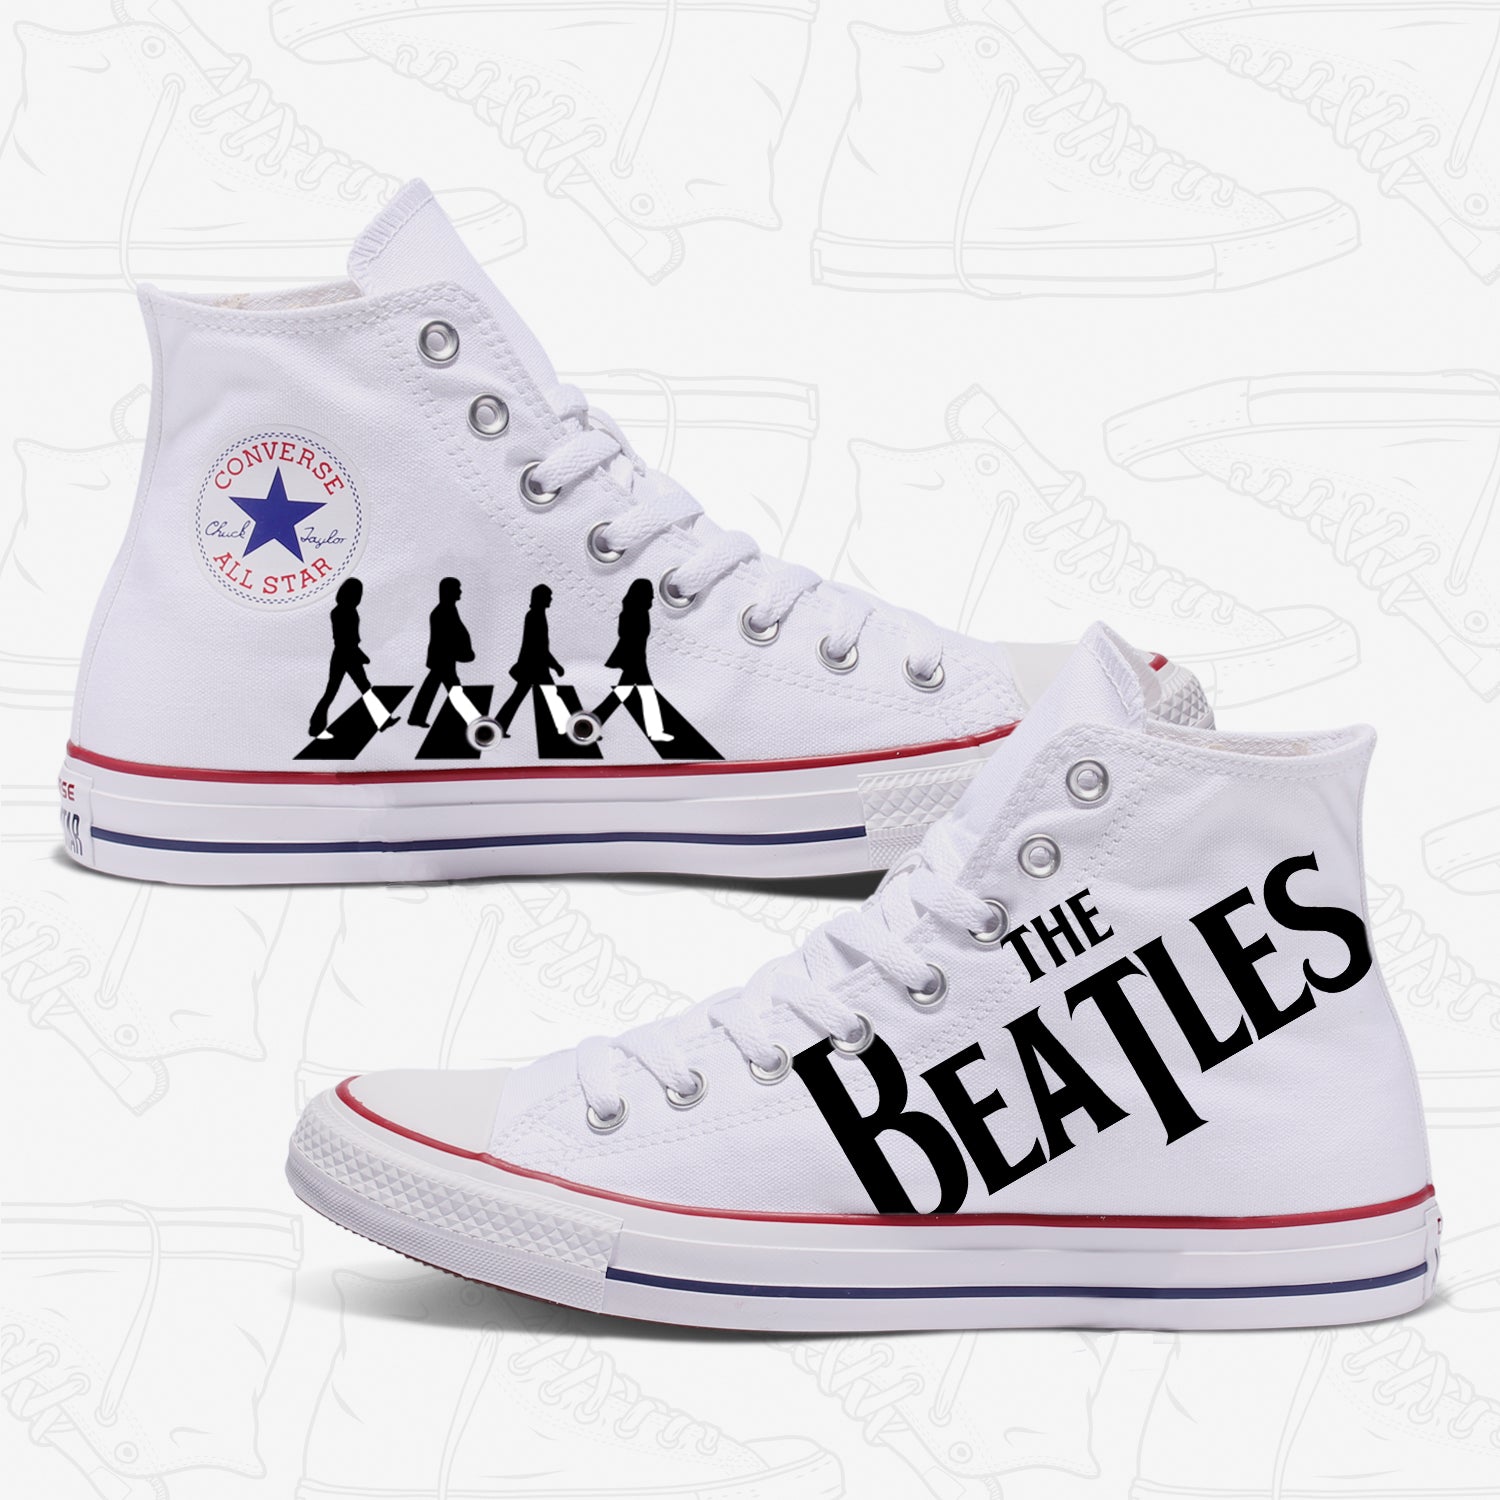 Pearl Jam Guitars Rock and Roll Converse High Top at www..com